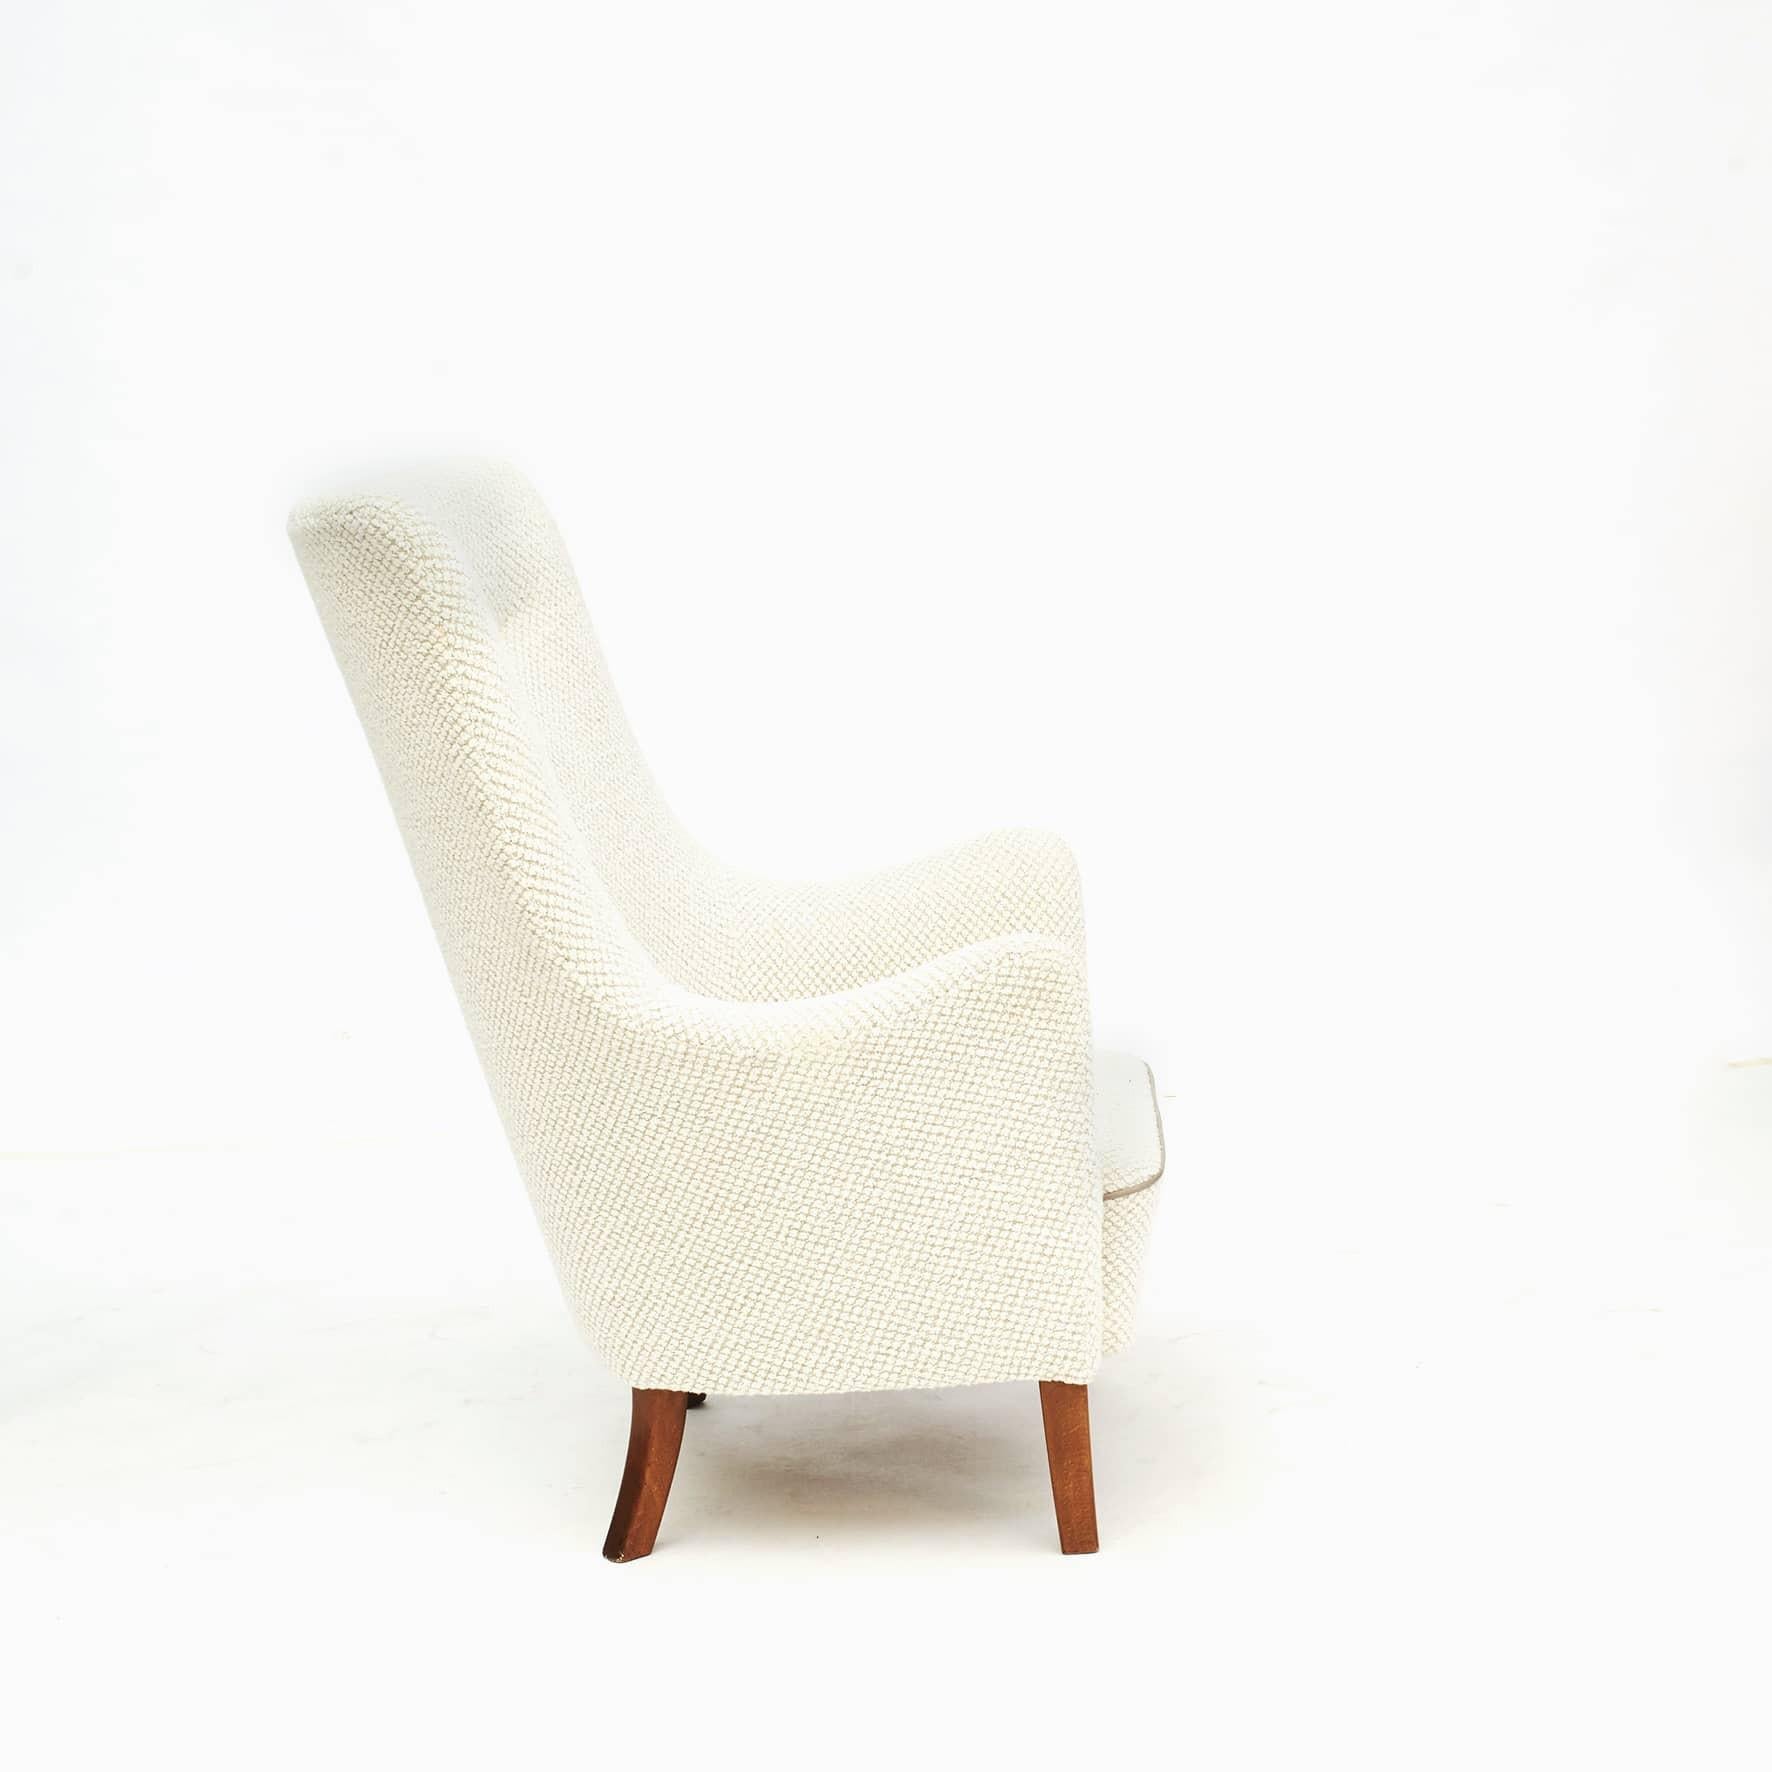 Danish high back easy chair, 1940-1950.
The seat with coil springs, legs in dark polished beech.
Newly upholstered in off-white boucle fabric from Nobilis.

The chair is very comfortable and in great condition.